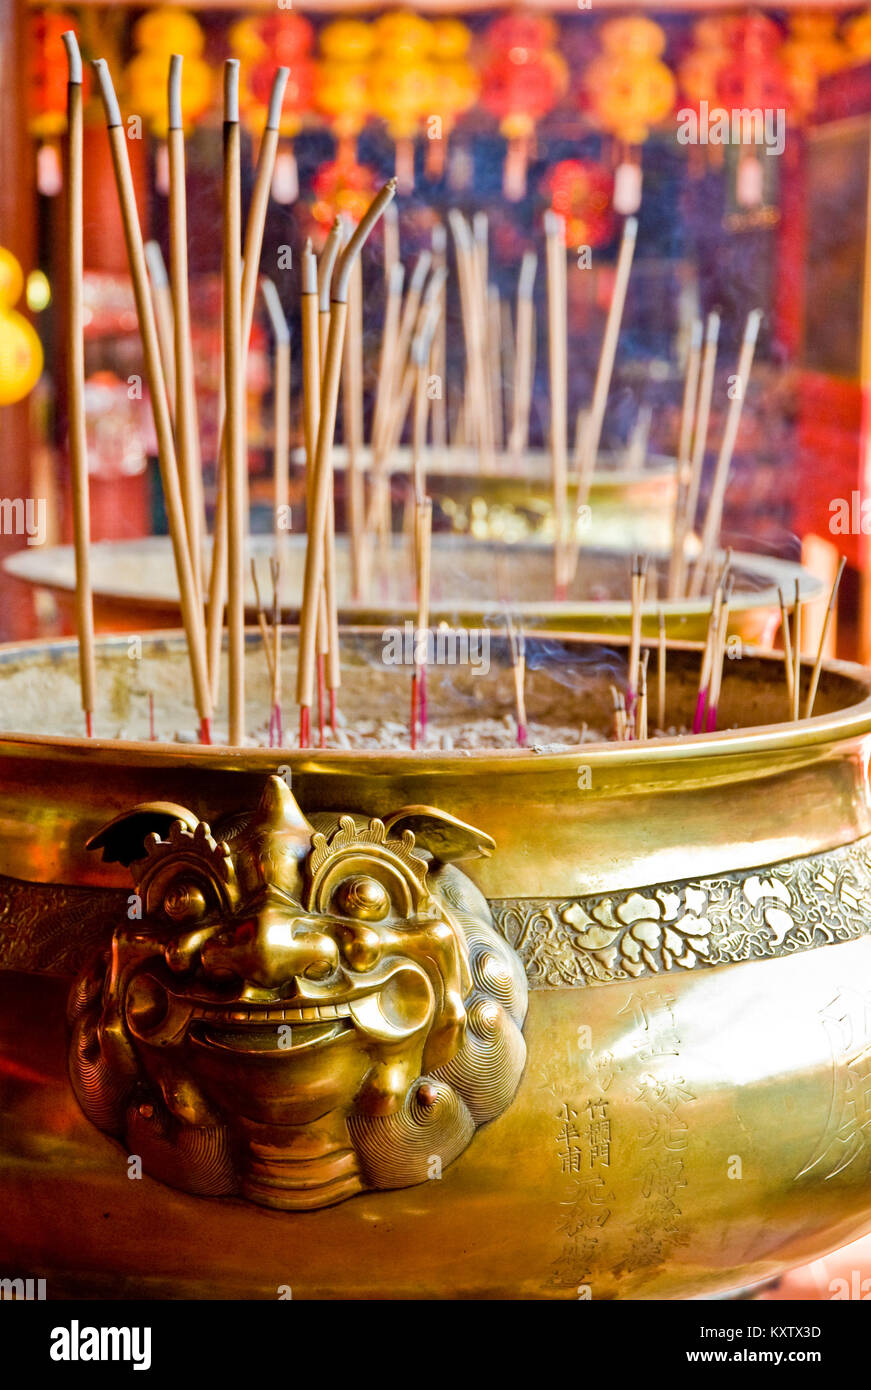 A close up of a lion head handle from a bronze incense bowl in the Chinese Kek Lok Si Temple during Chinese New Year. Stock Photo